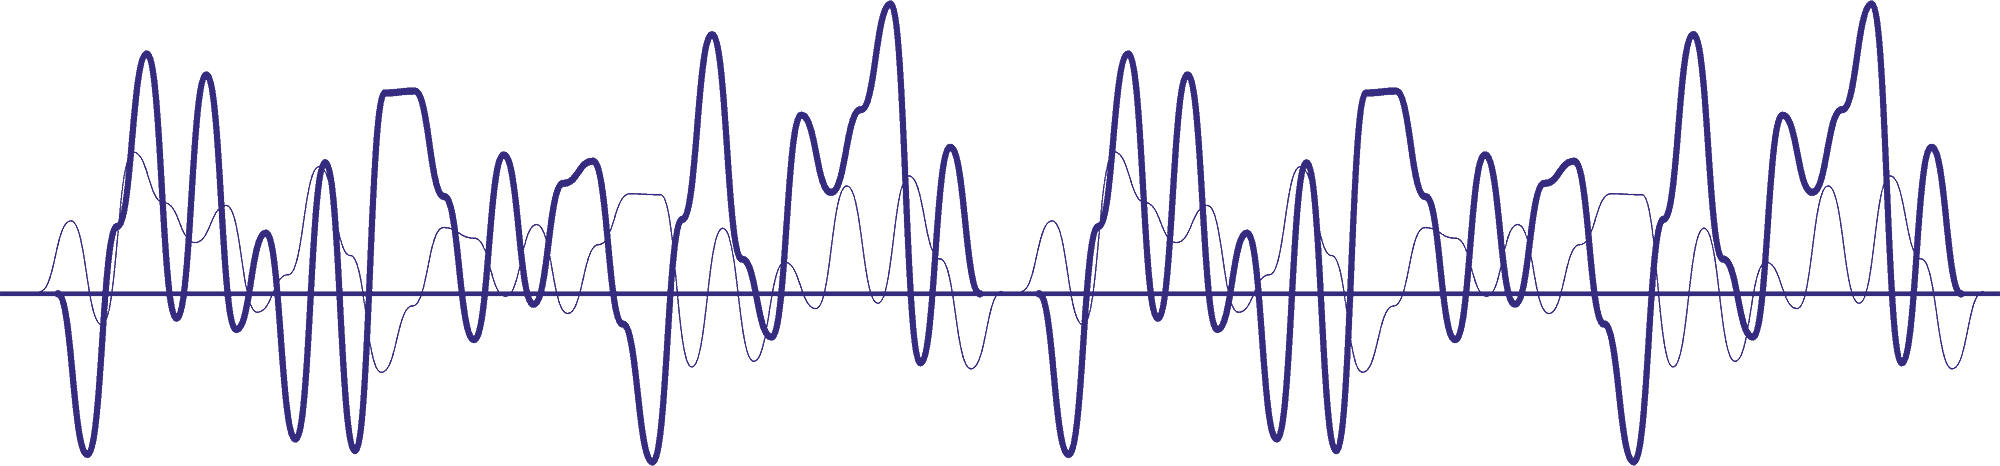 Hearing wave lengths